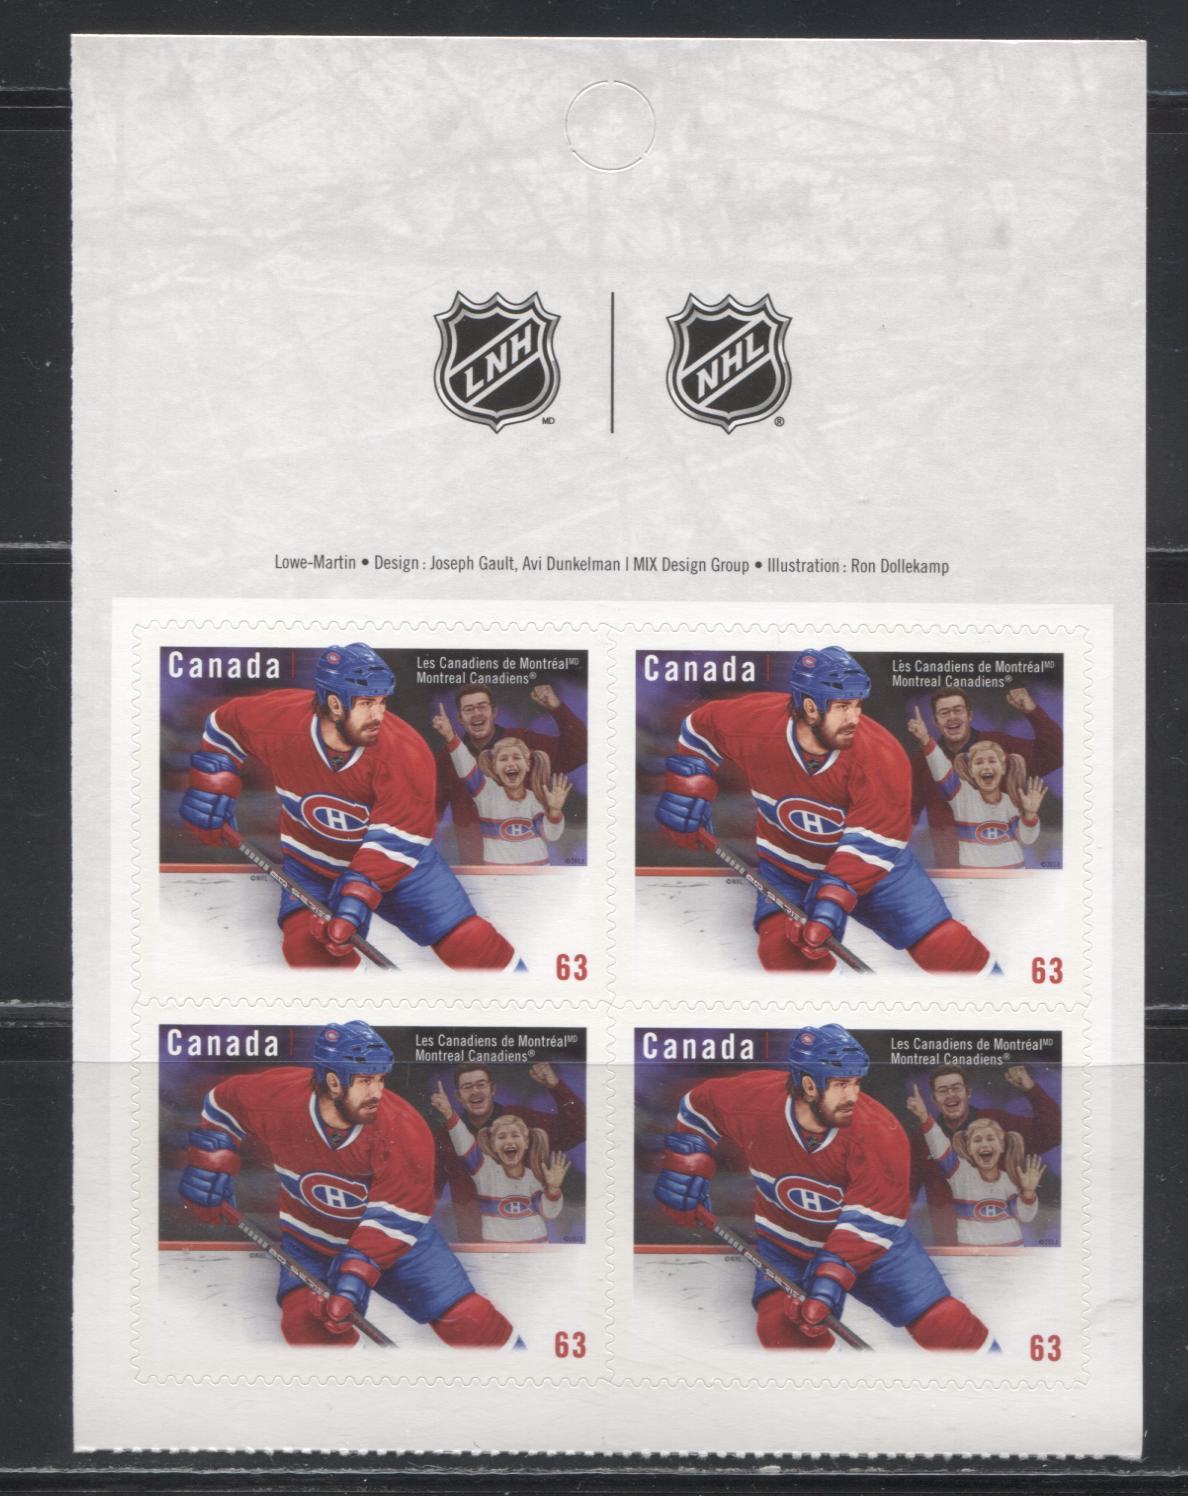 Lot 104 Canada #2670-2672 2013 Canadian NHL Team Jerseys Issue, VFNH Booklet Panes of 4 on LF TRC Paper, Plus a Set of Singles From the Souvenir Sheet